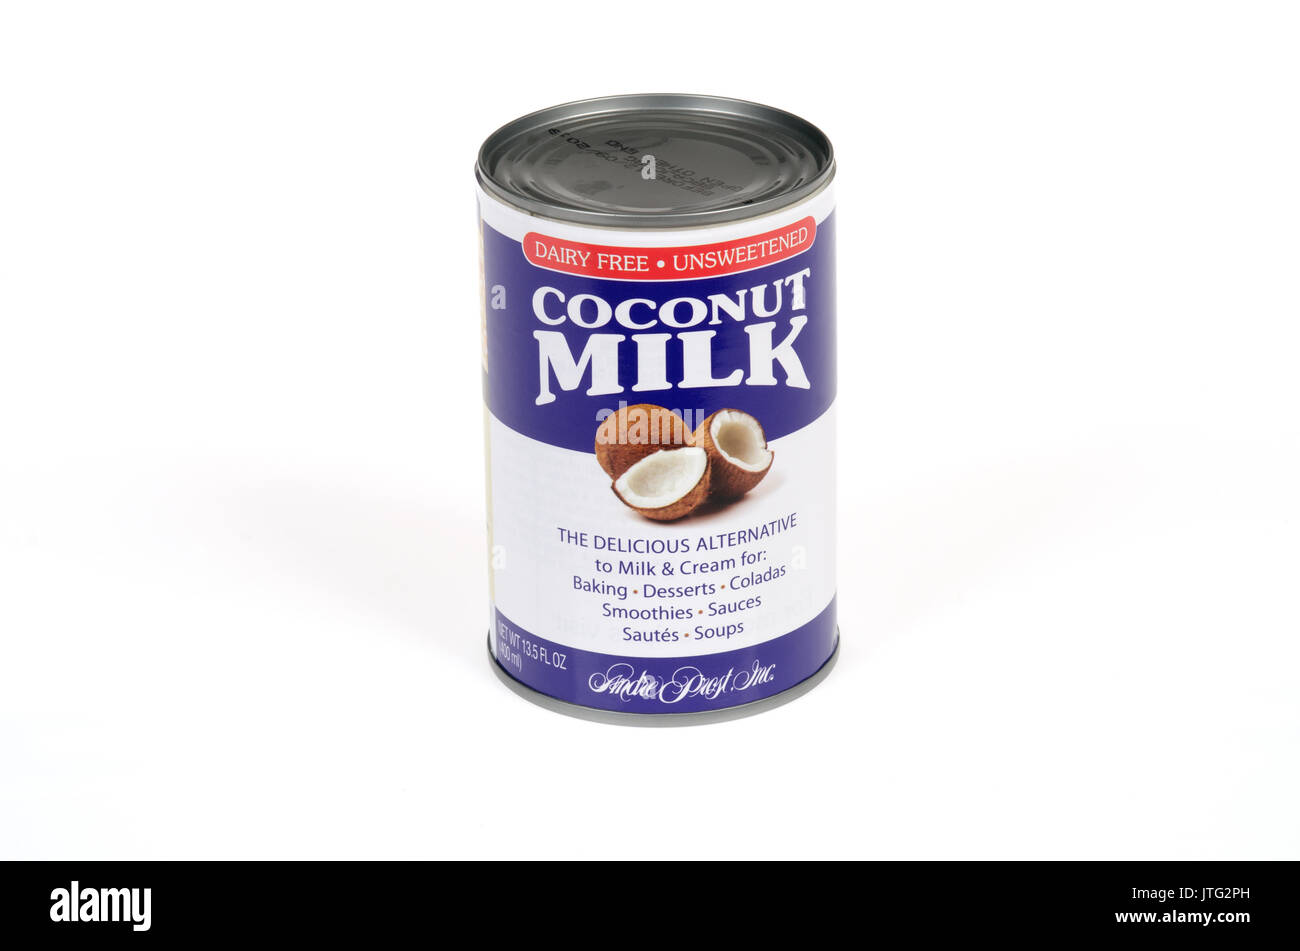 Unopened can of unsweetened dairy free coconut milk on white background.  Cut-out Stock Photo